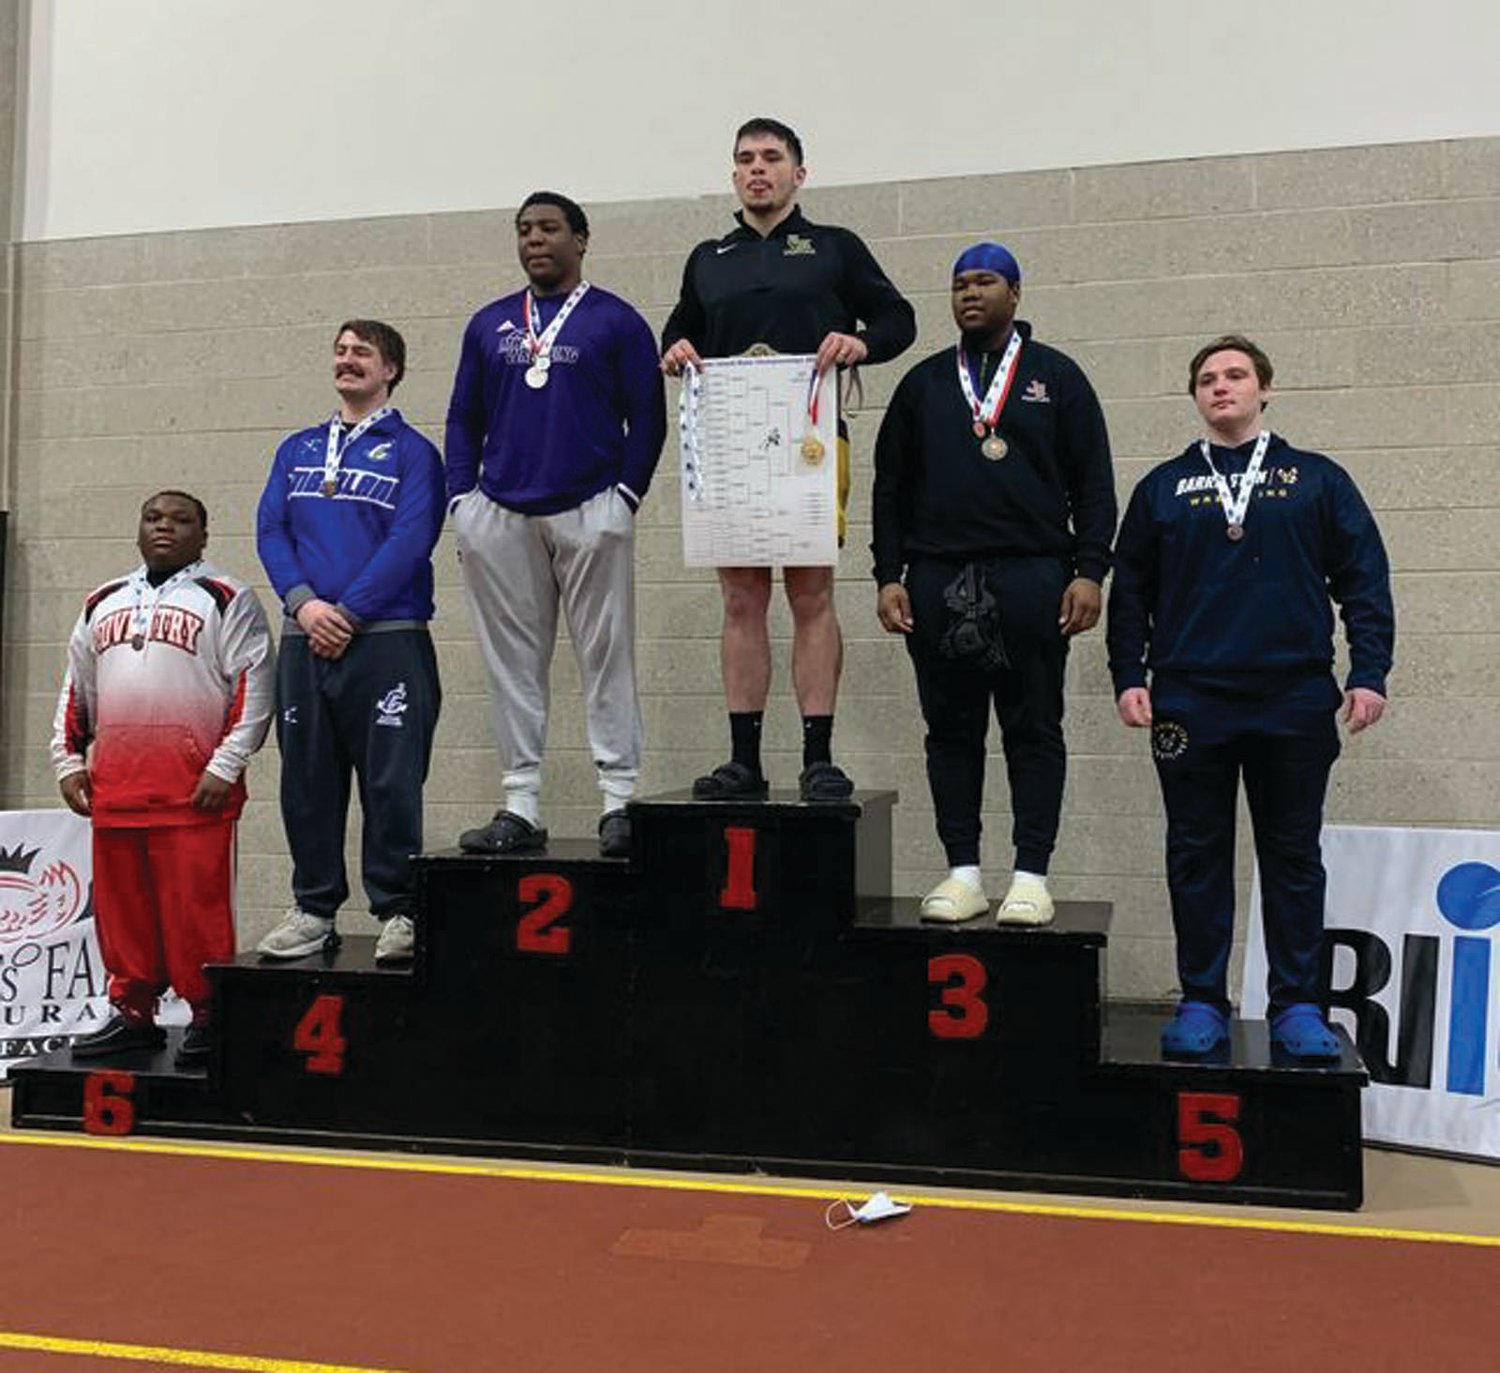 TOP OF THE PODIUM: Spencer Fine takes first place at 170 pounds.